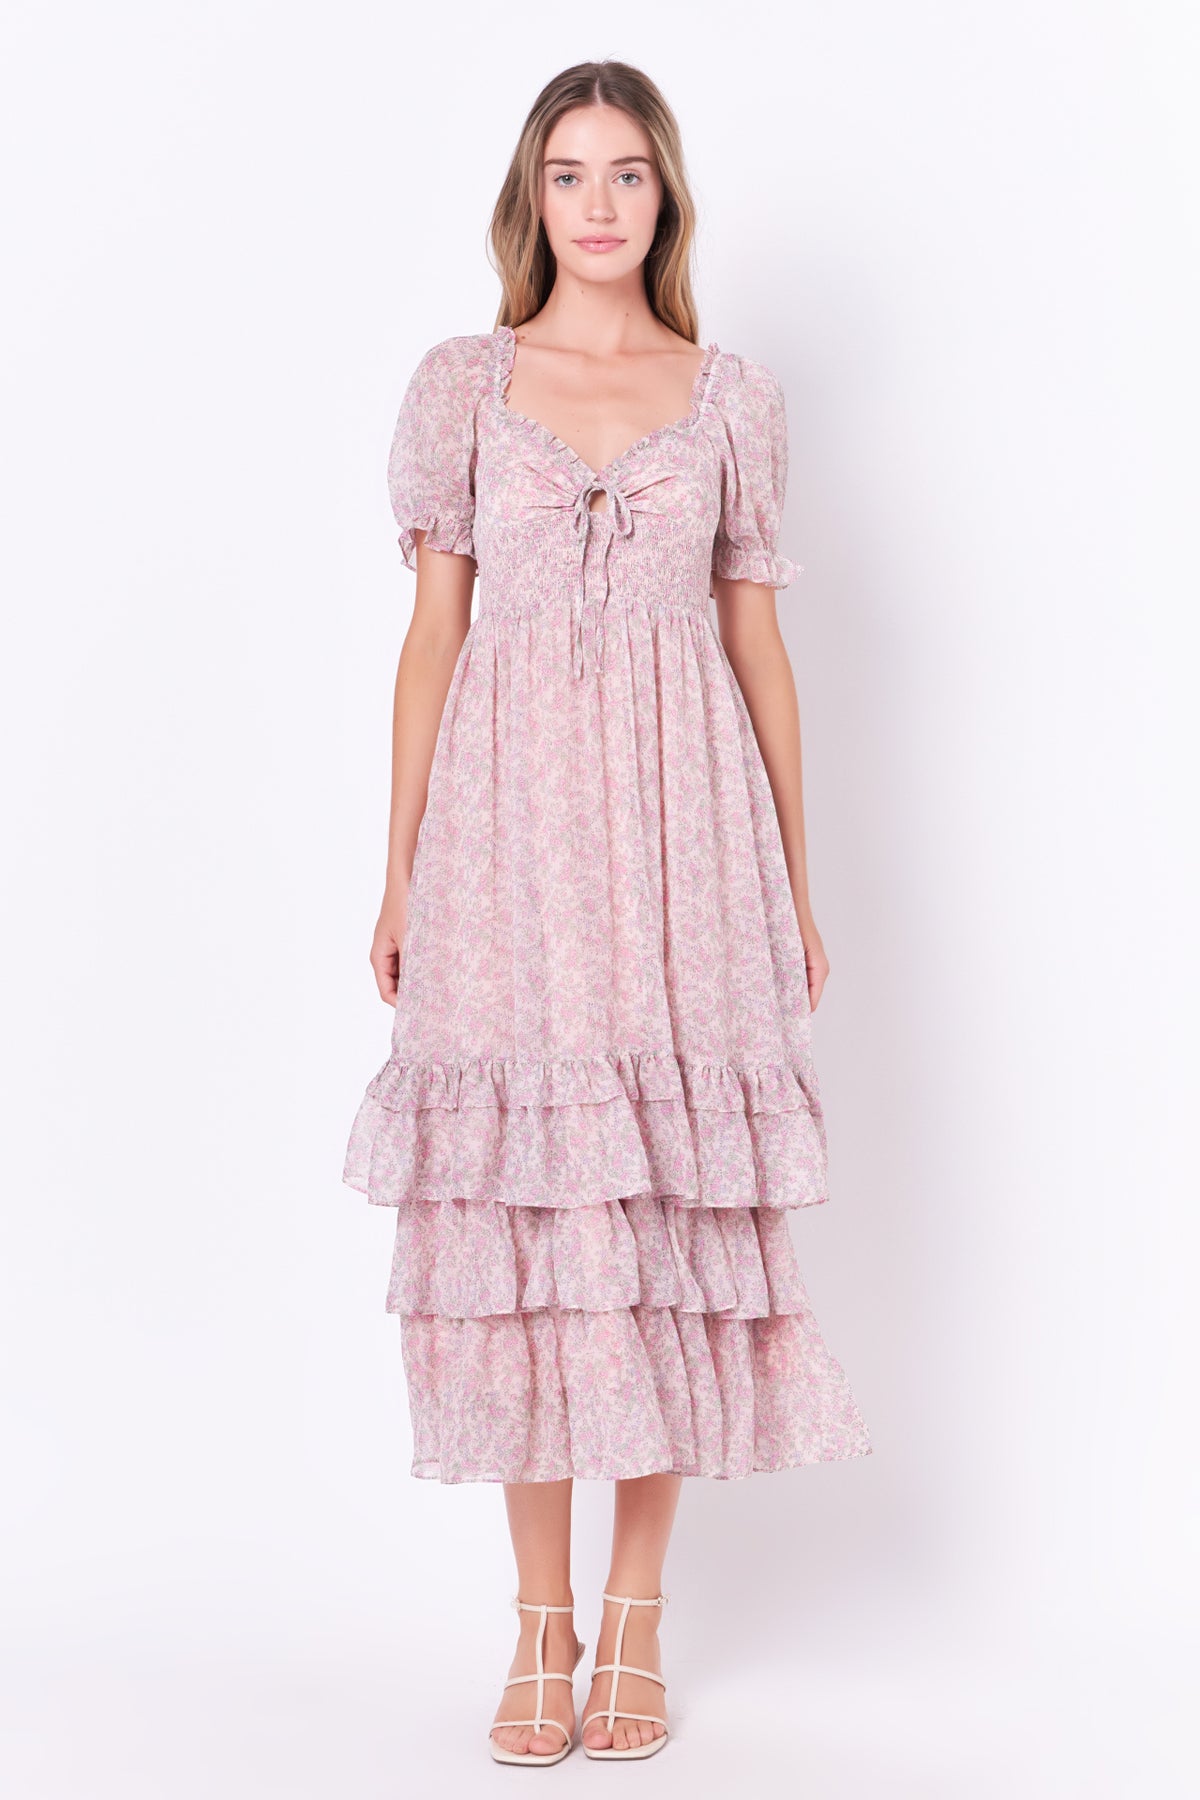 FREE THE ROSES - Ruffled Sweetheart Maxi Dress - DRESSES available at Objectrare